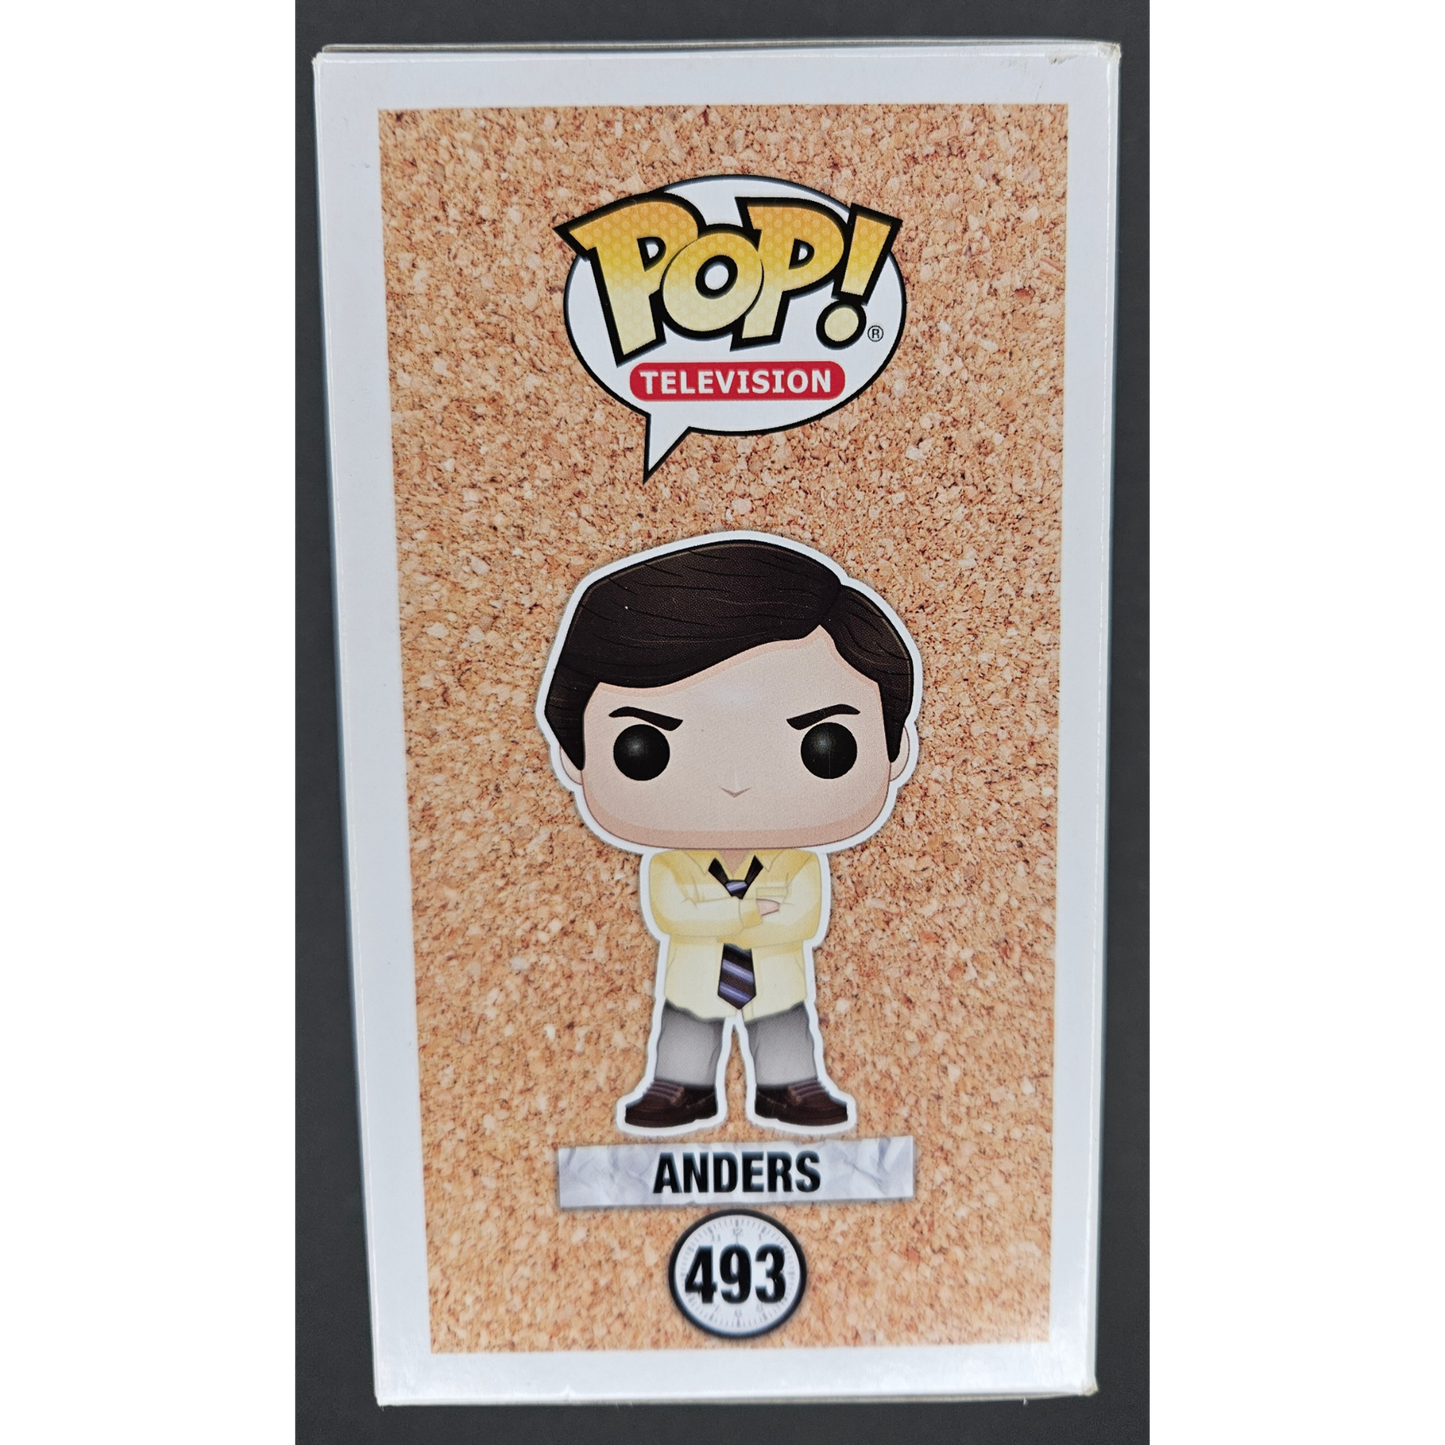 Anders Funko Pop! Workaholics Television #493